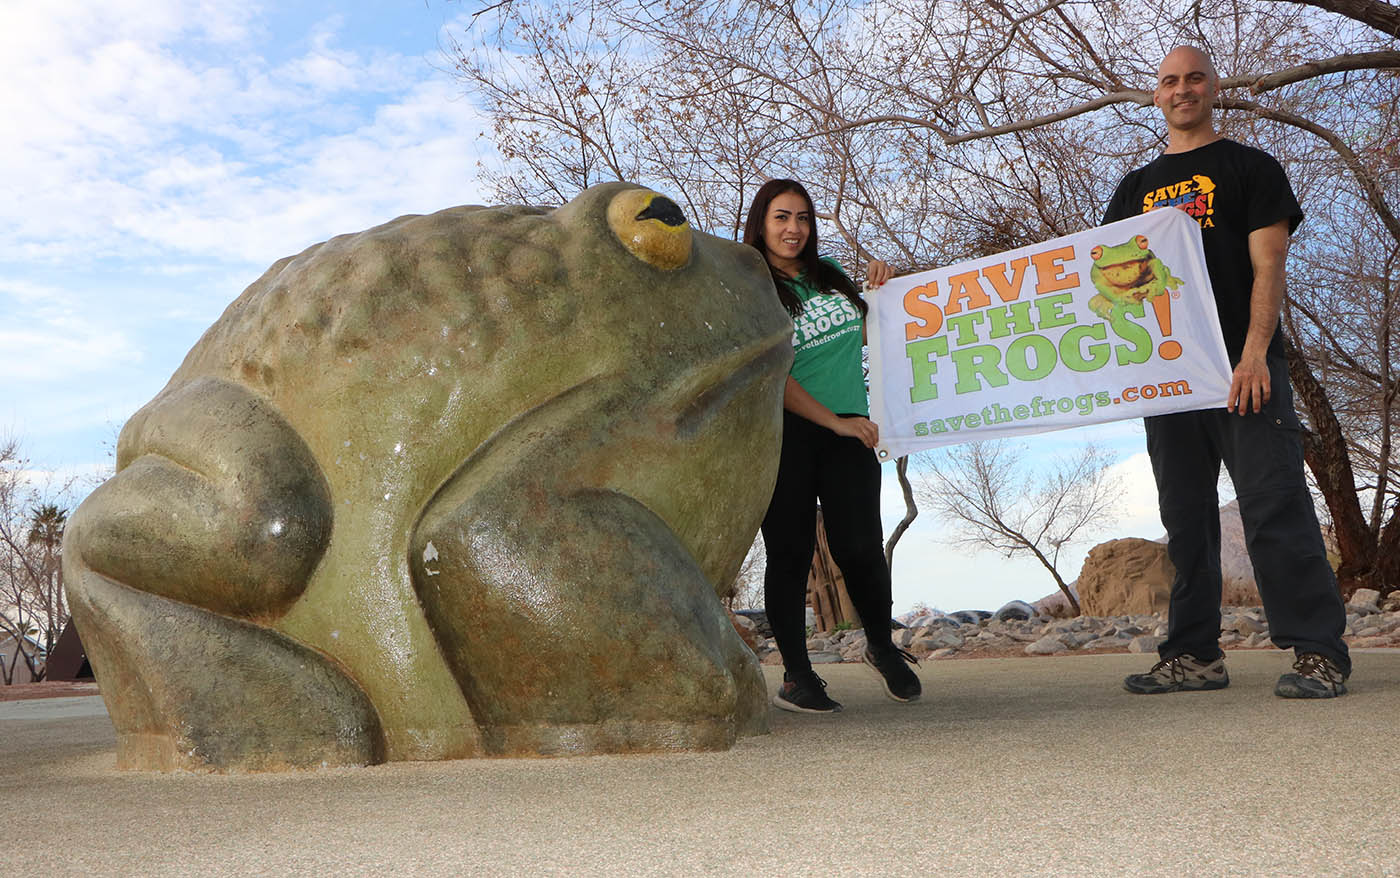 Flag - Save The Frogs - Kerry Kriger Clark County Wetlands Park NV 2021-03-17